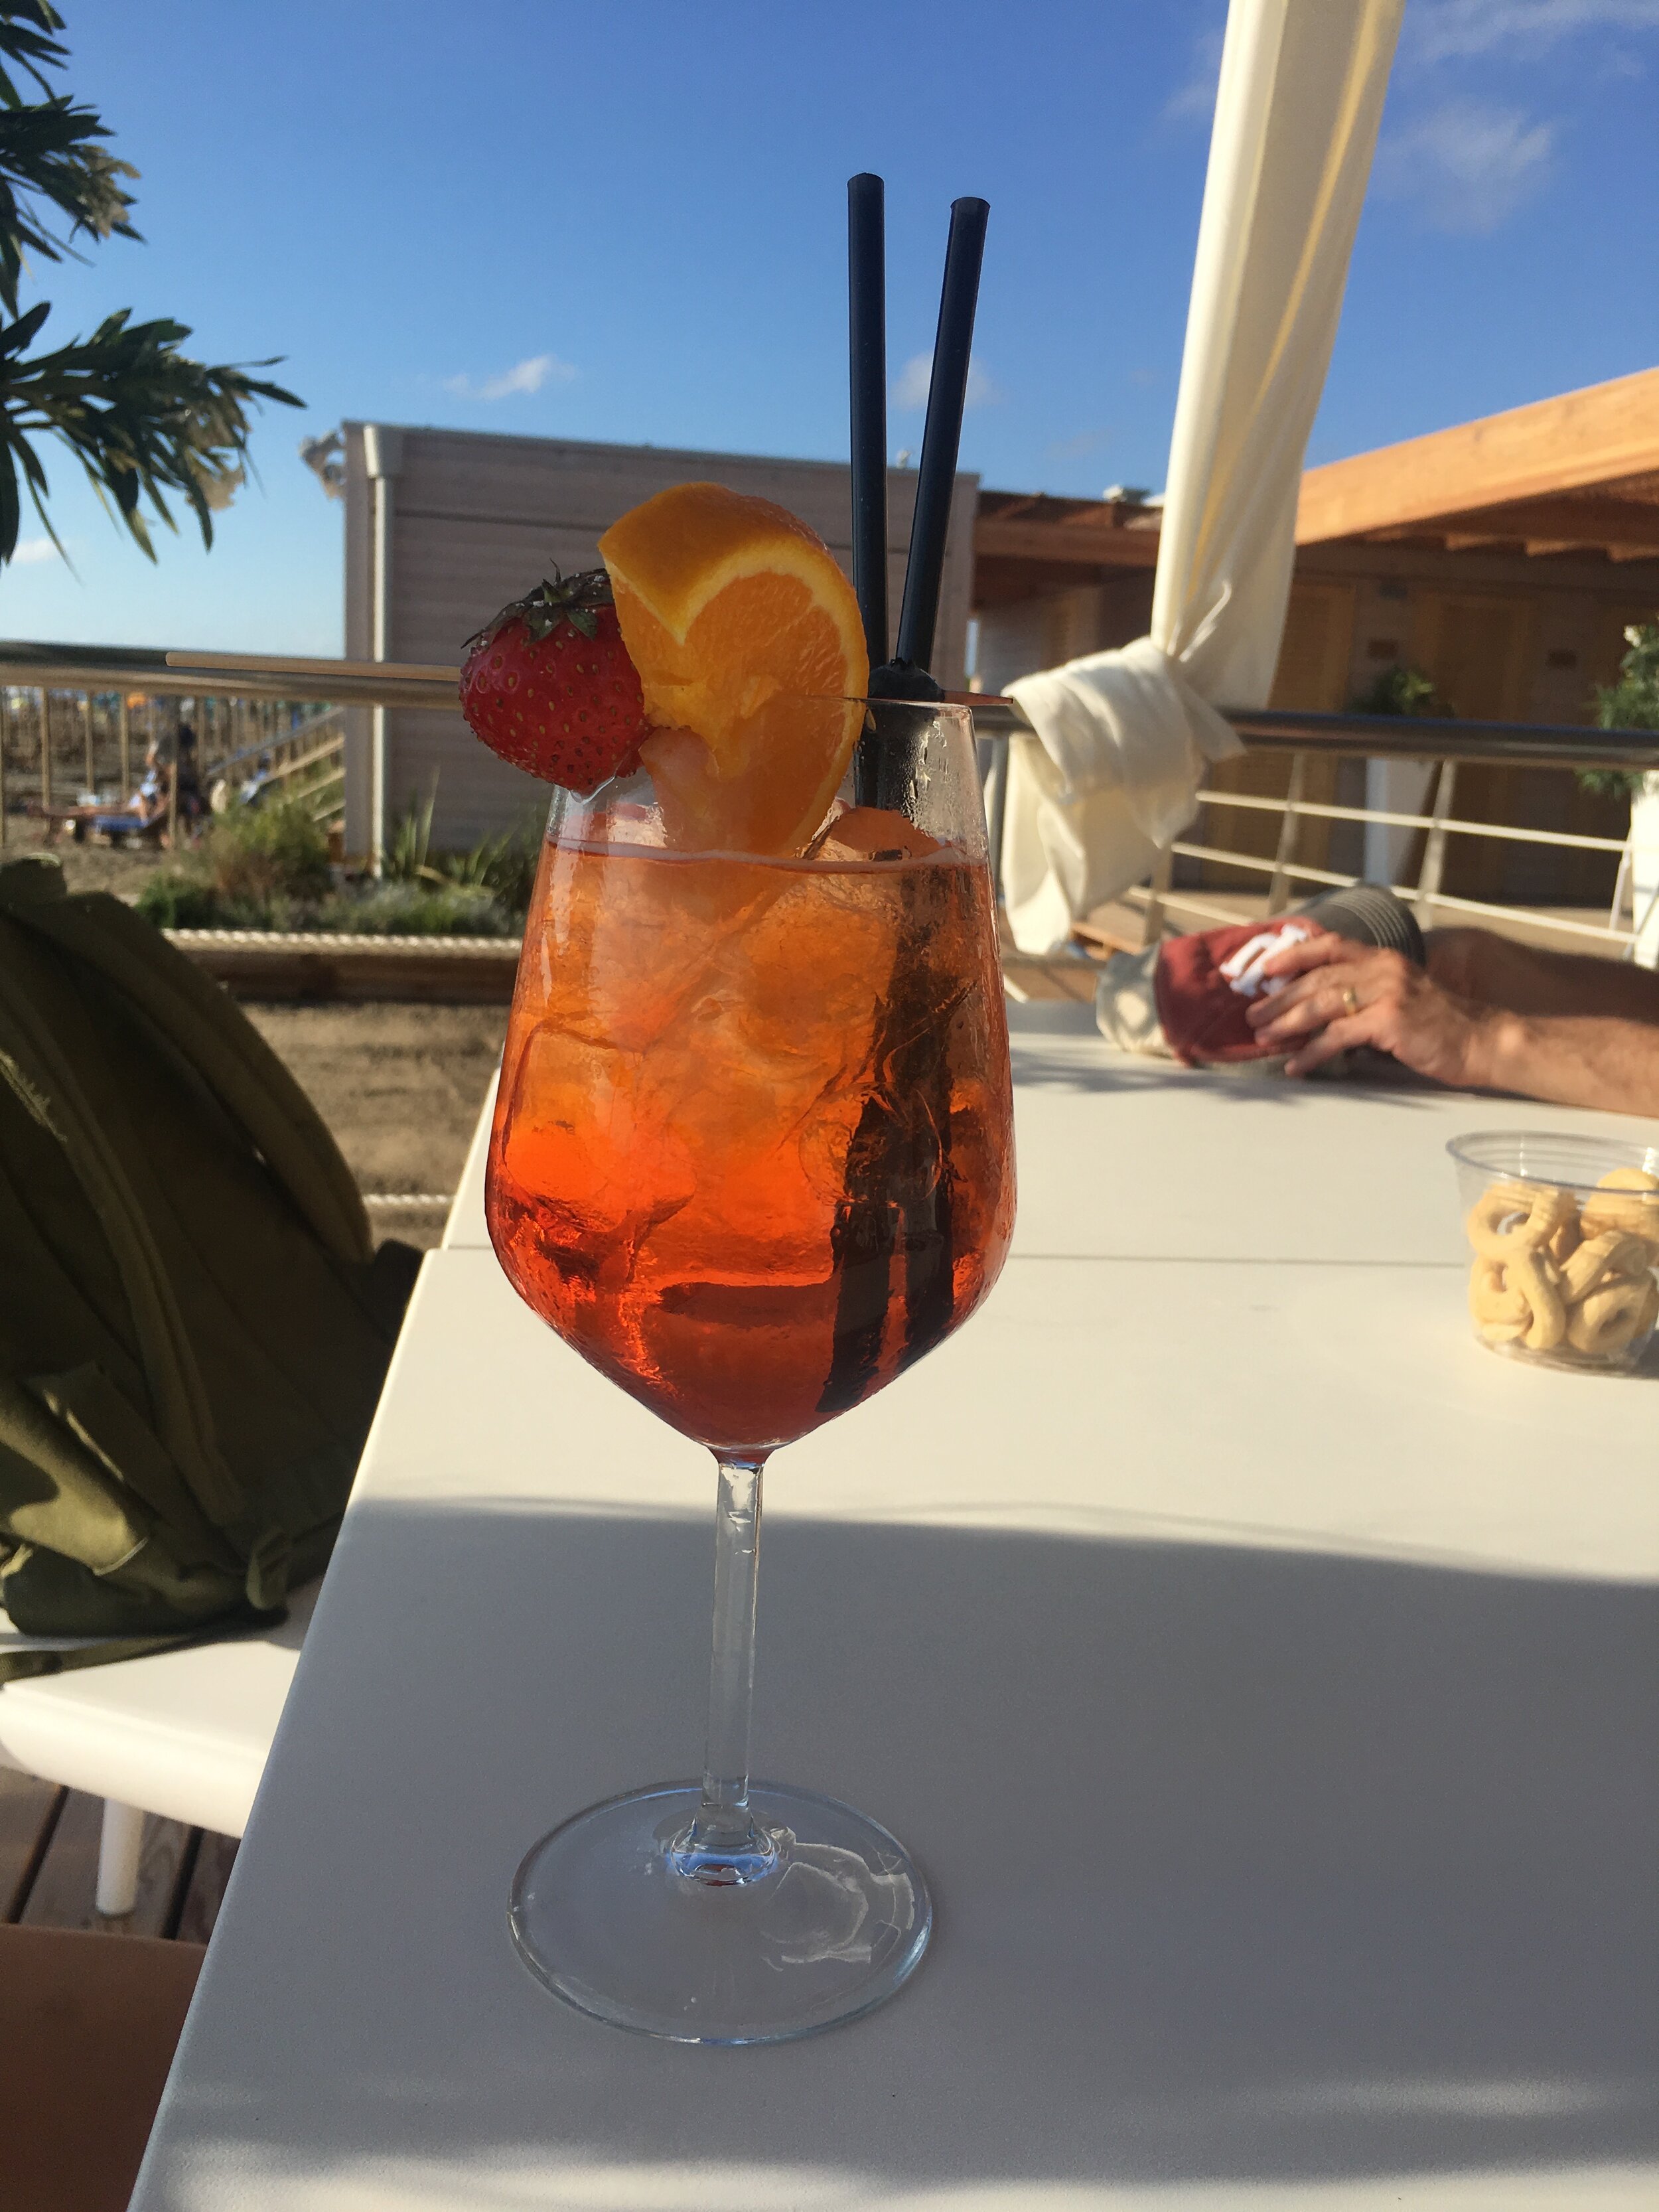 The Classic Spritz - All over Italy